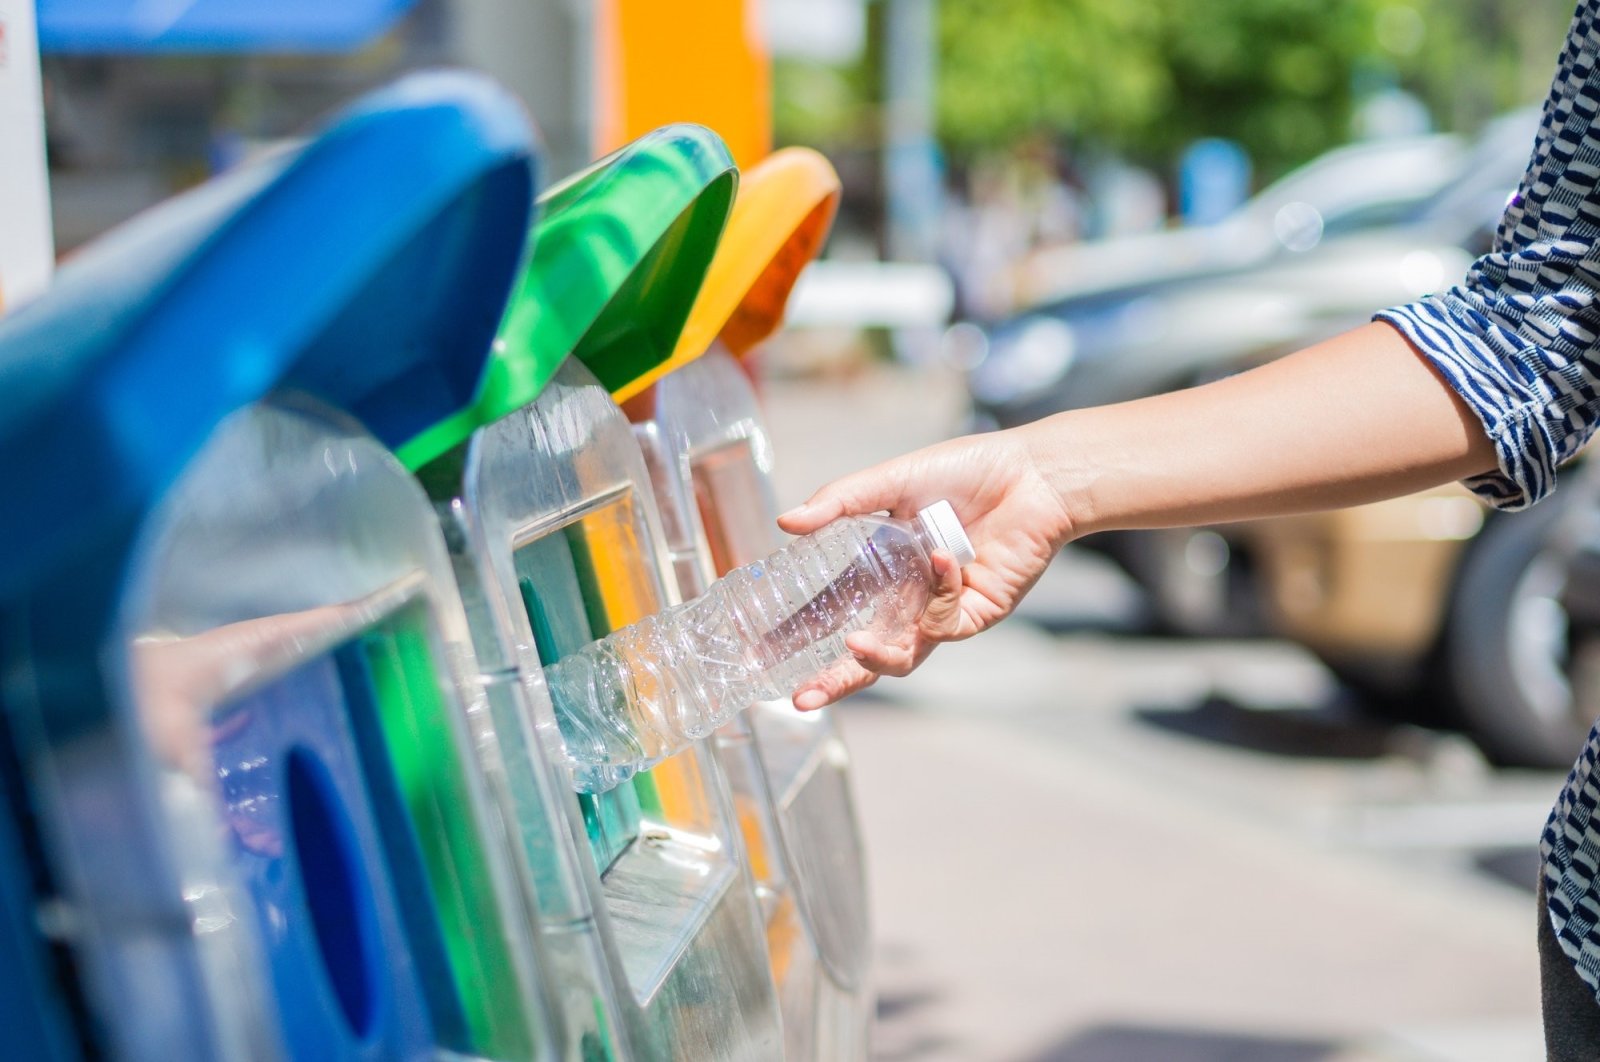 The picture shows a person throwing a plastic bottle in a recycling bin. (Shutterstock Photo)